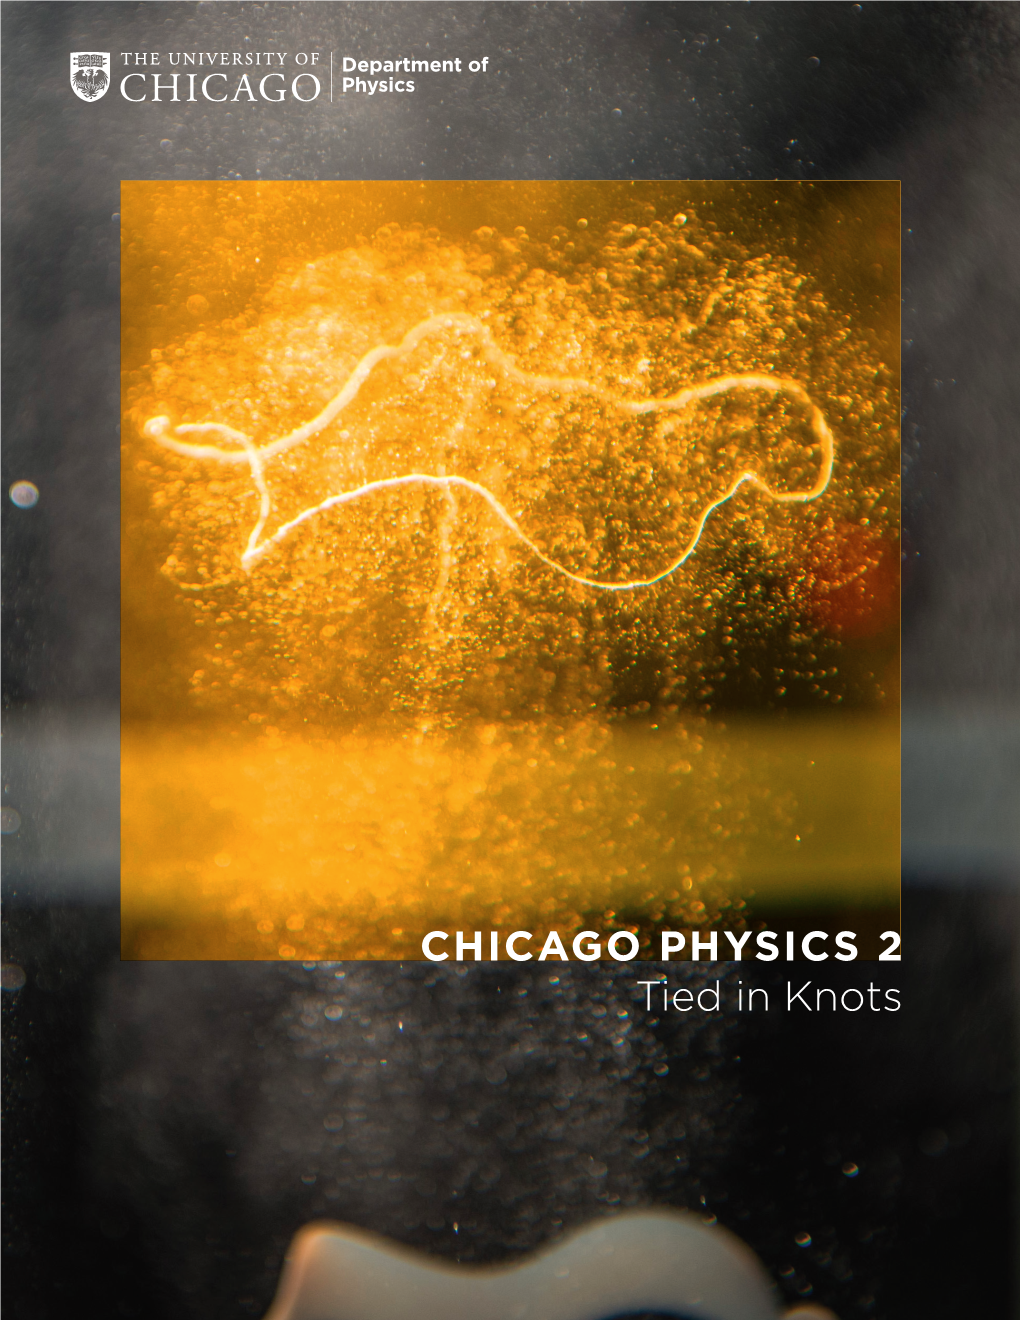 CHICAGO PHYSICS 2 Tied in Knots Welcome to the Second Issue of Chicago Physics! This Past Year Has Been an Eventful One for Our Department